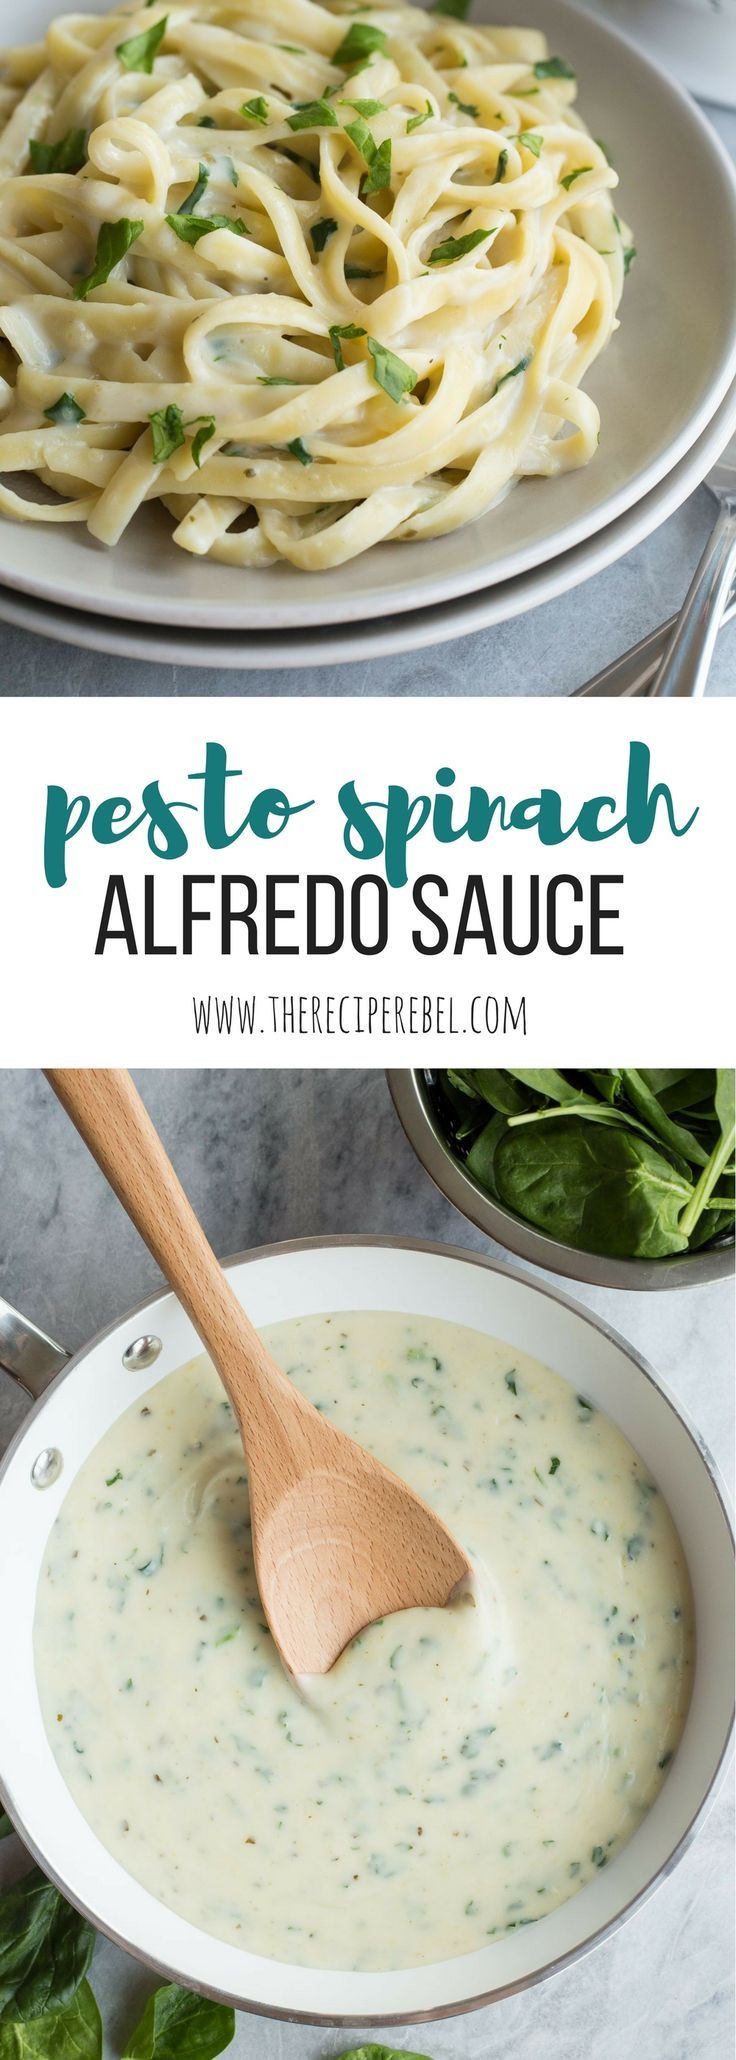 Low Calorie Pasta Sauce Recipes
 This Pesto Spinach Alfredo Sauce is light in calories and